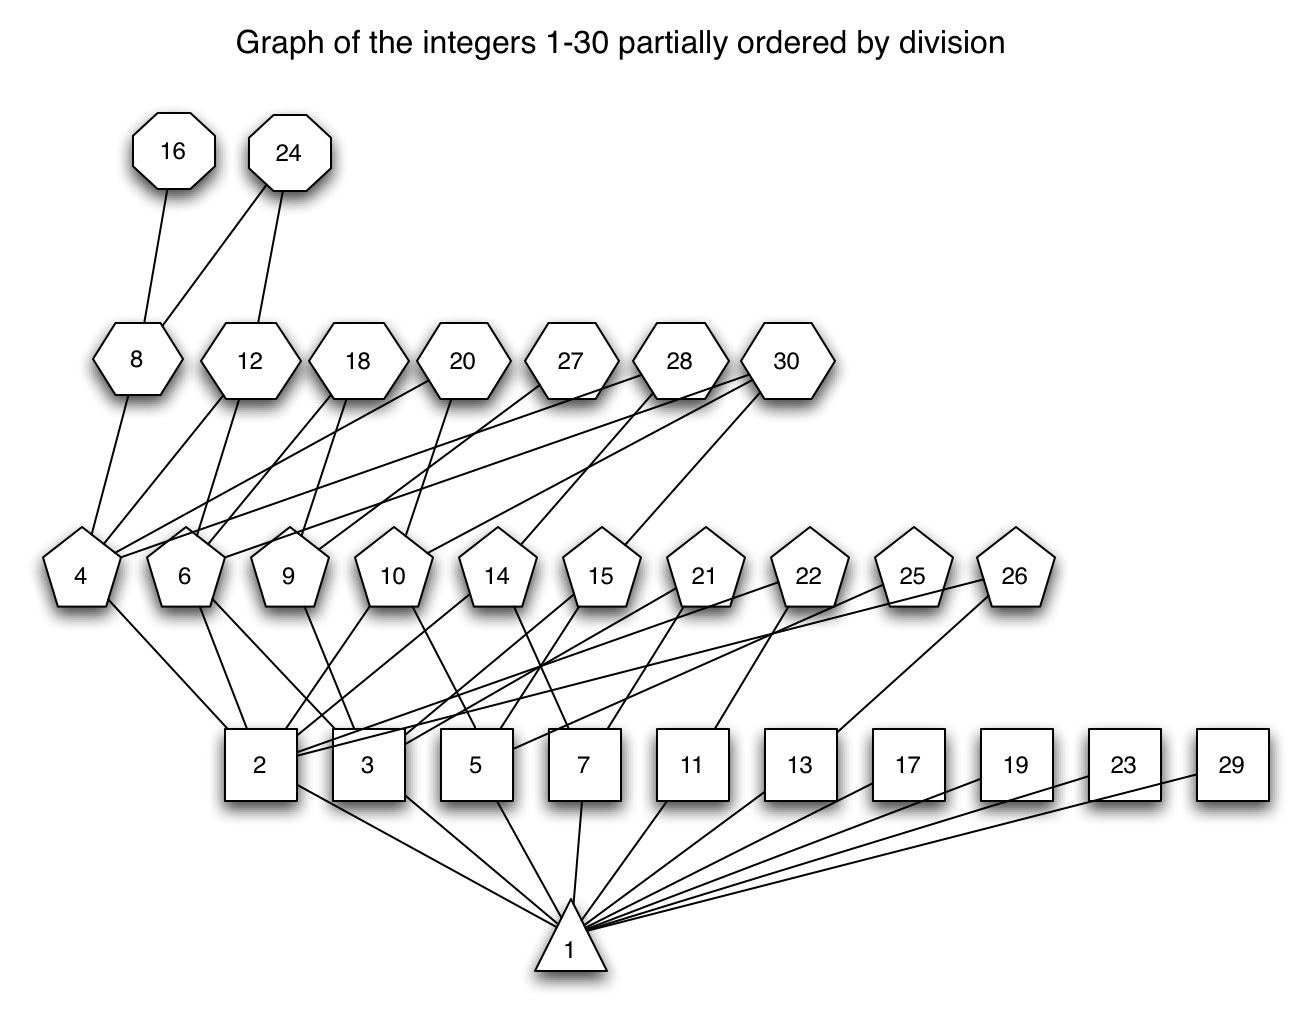 poset of the integers 1 through 30 ordered by division